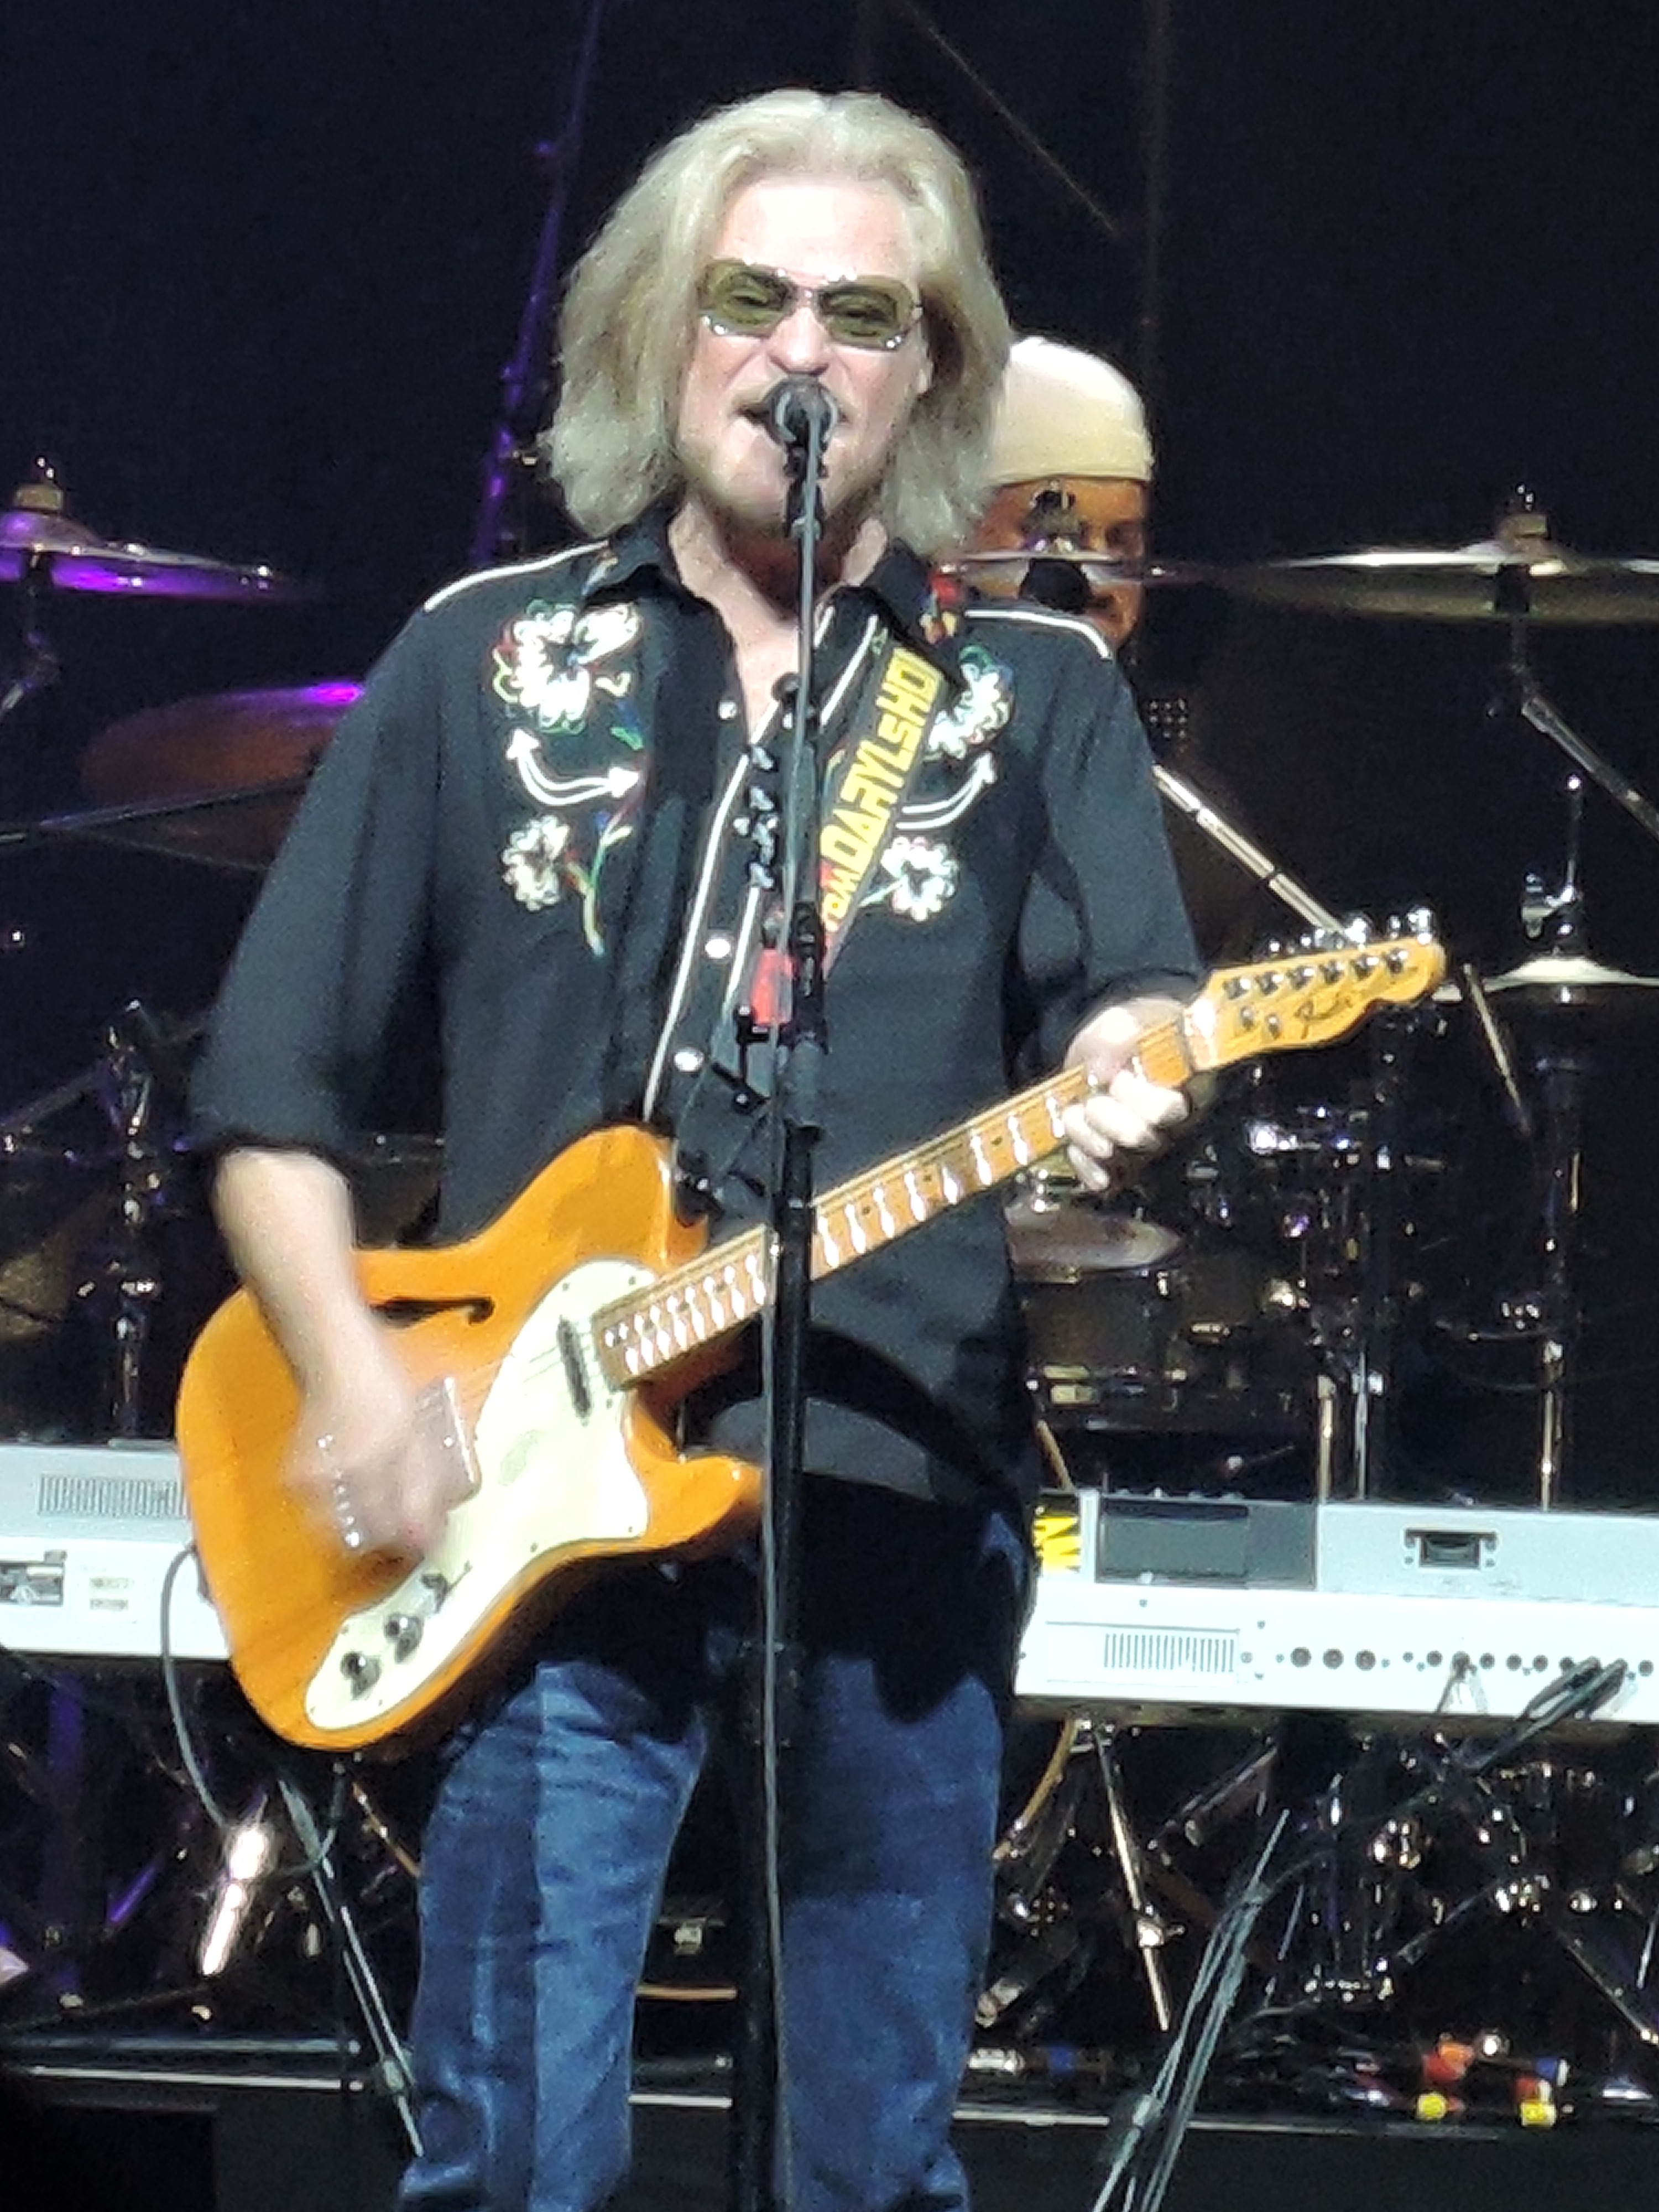 Hall And Oates Concert Delivers A Few Philly Surprises To The Philly Faithful The Vinyl